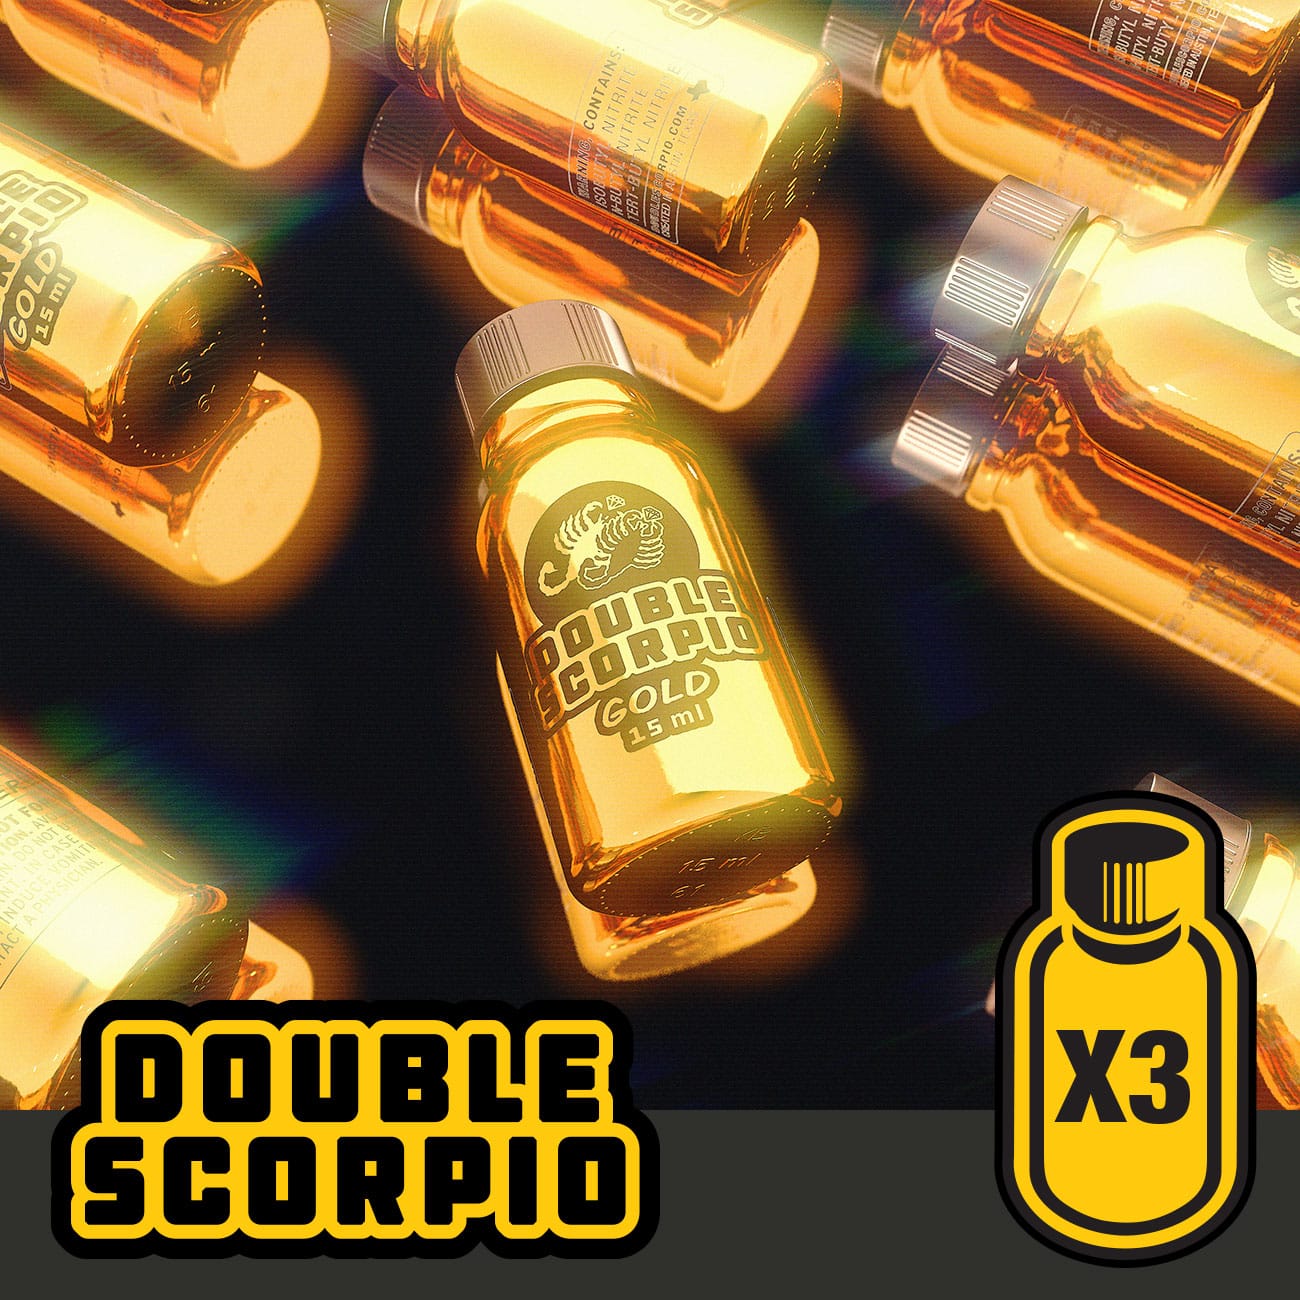 Shimmering amber bottles of "Double Scorpio Gold - Triple Pack (10ml x 3)" lined up against a dark background, casting reflections with a golden glow, and the emblem of a bottle with "x".